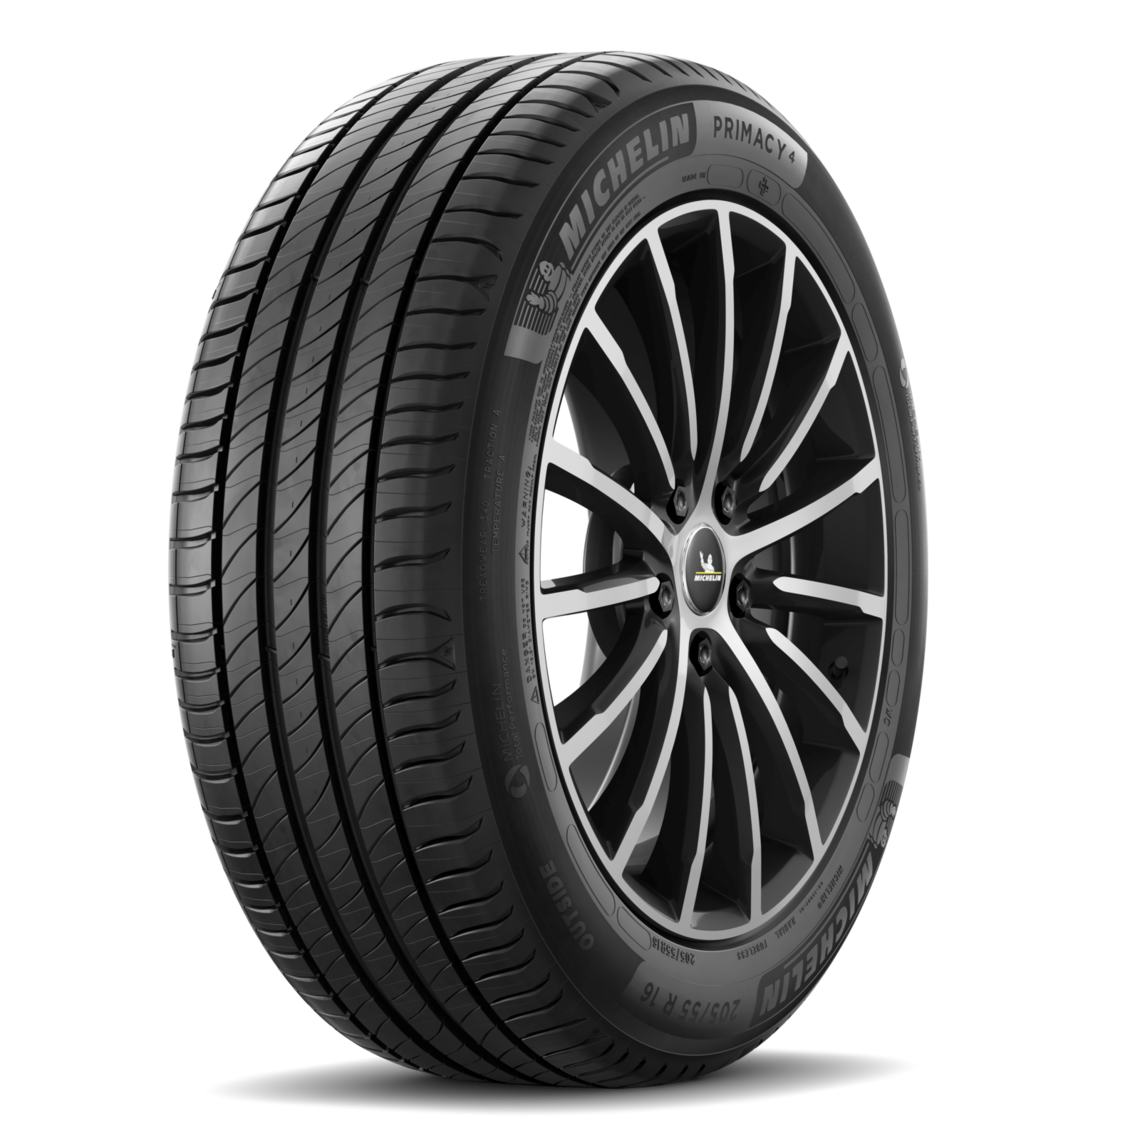 MICHELIN PRIMACY 4+ - Car Tyre | MICHELIN Middle-East Official Website